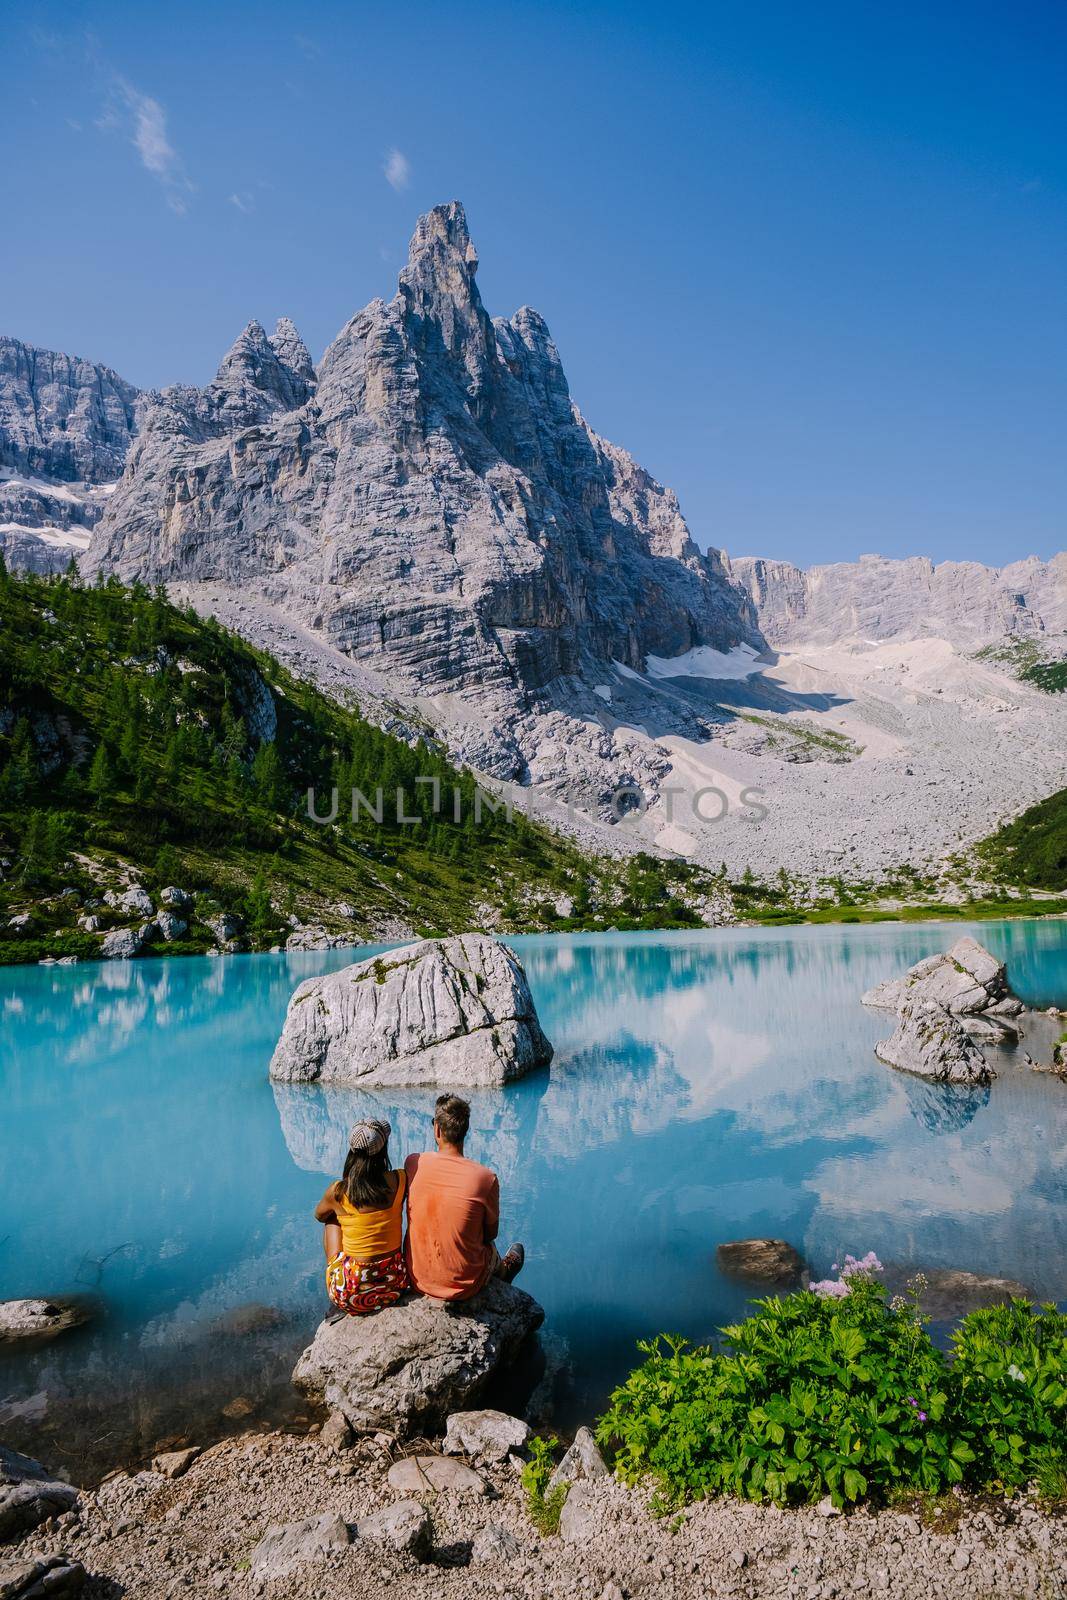 Lake Sorapis Italian Dolomites, Morning with clear sky on Lago di Sorapis in italian Dolomites, lake with unique turquoise color water in Belluno province in Nothern Italy by fokkebok